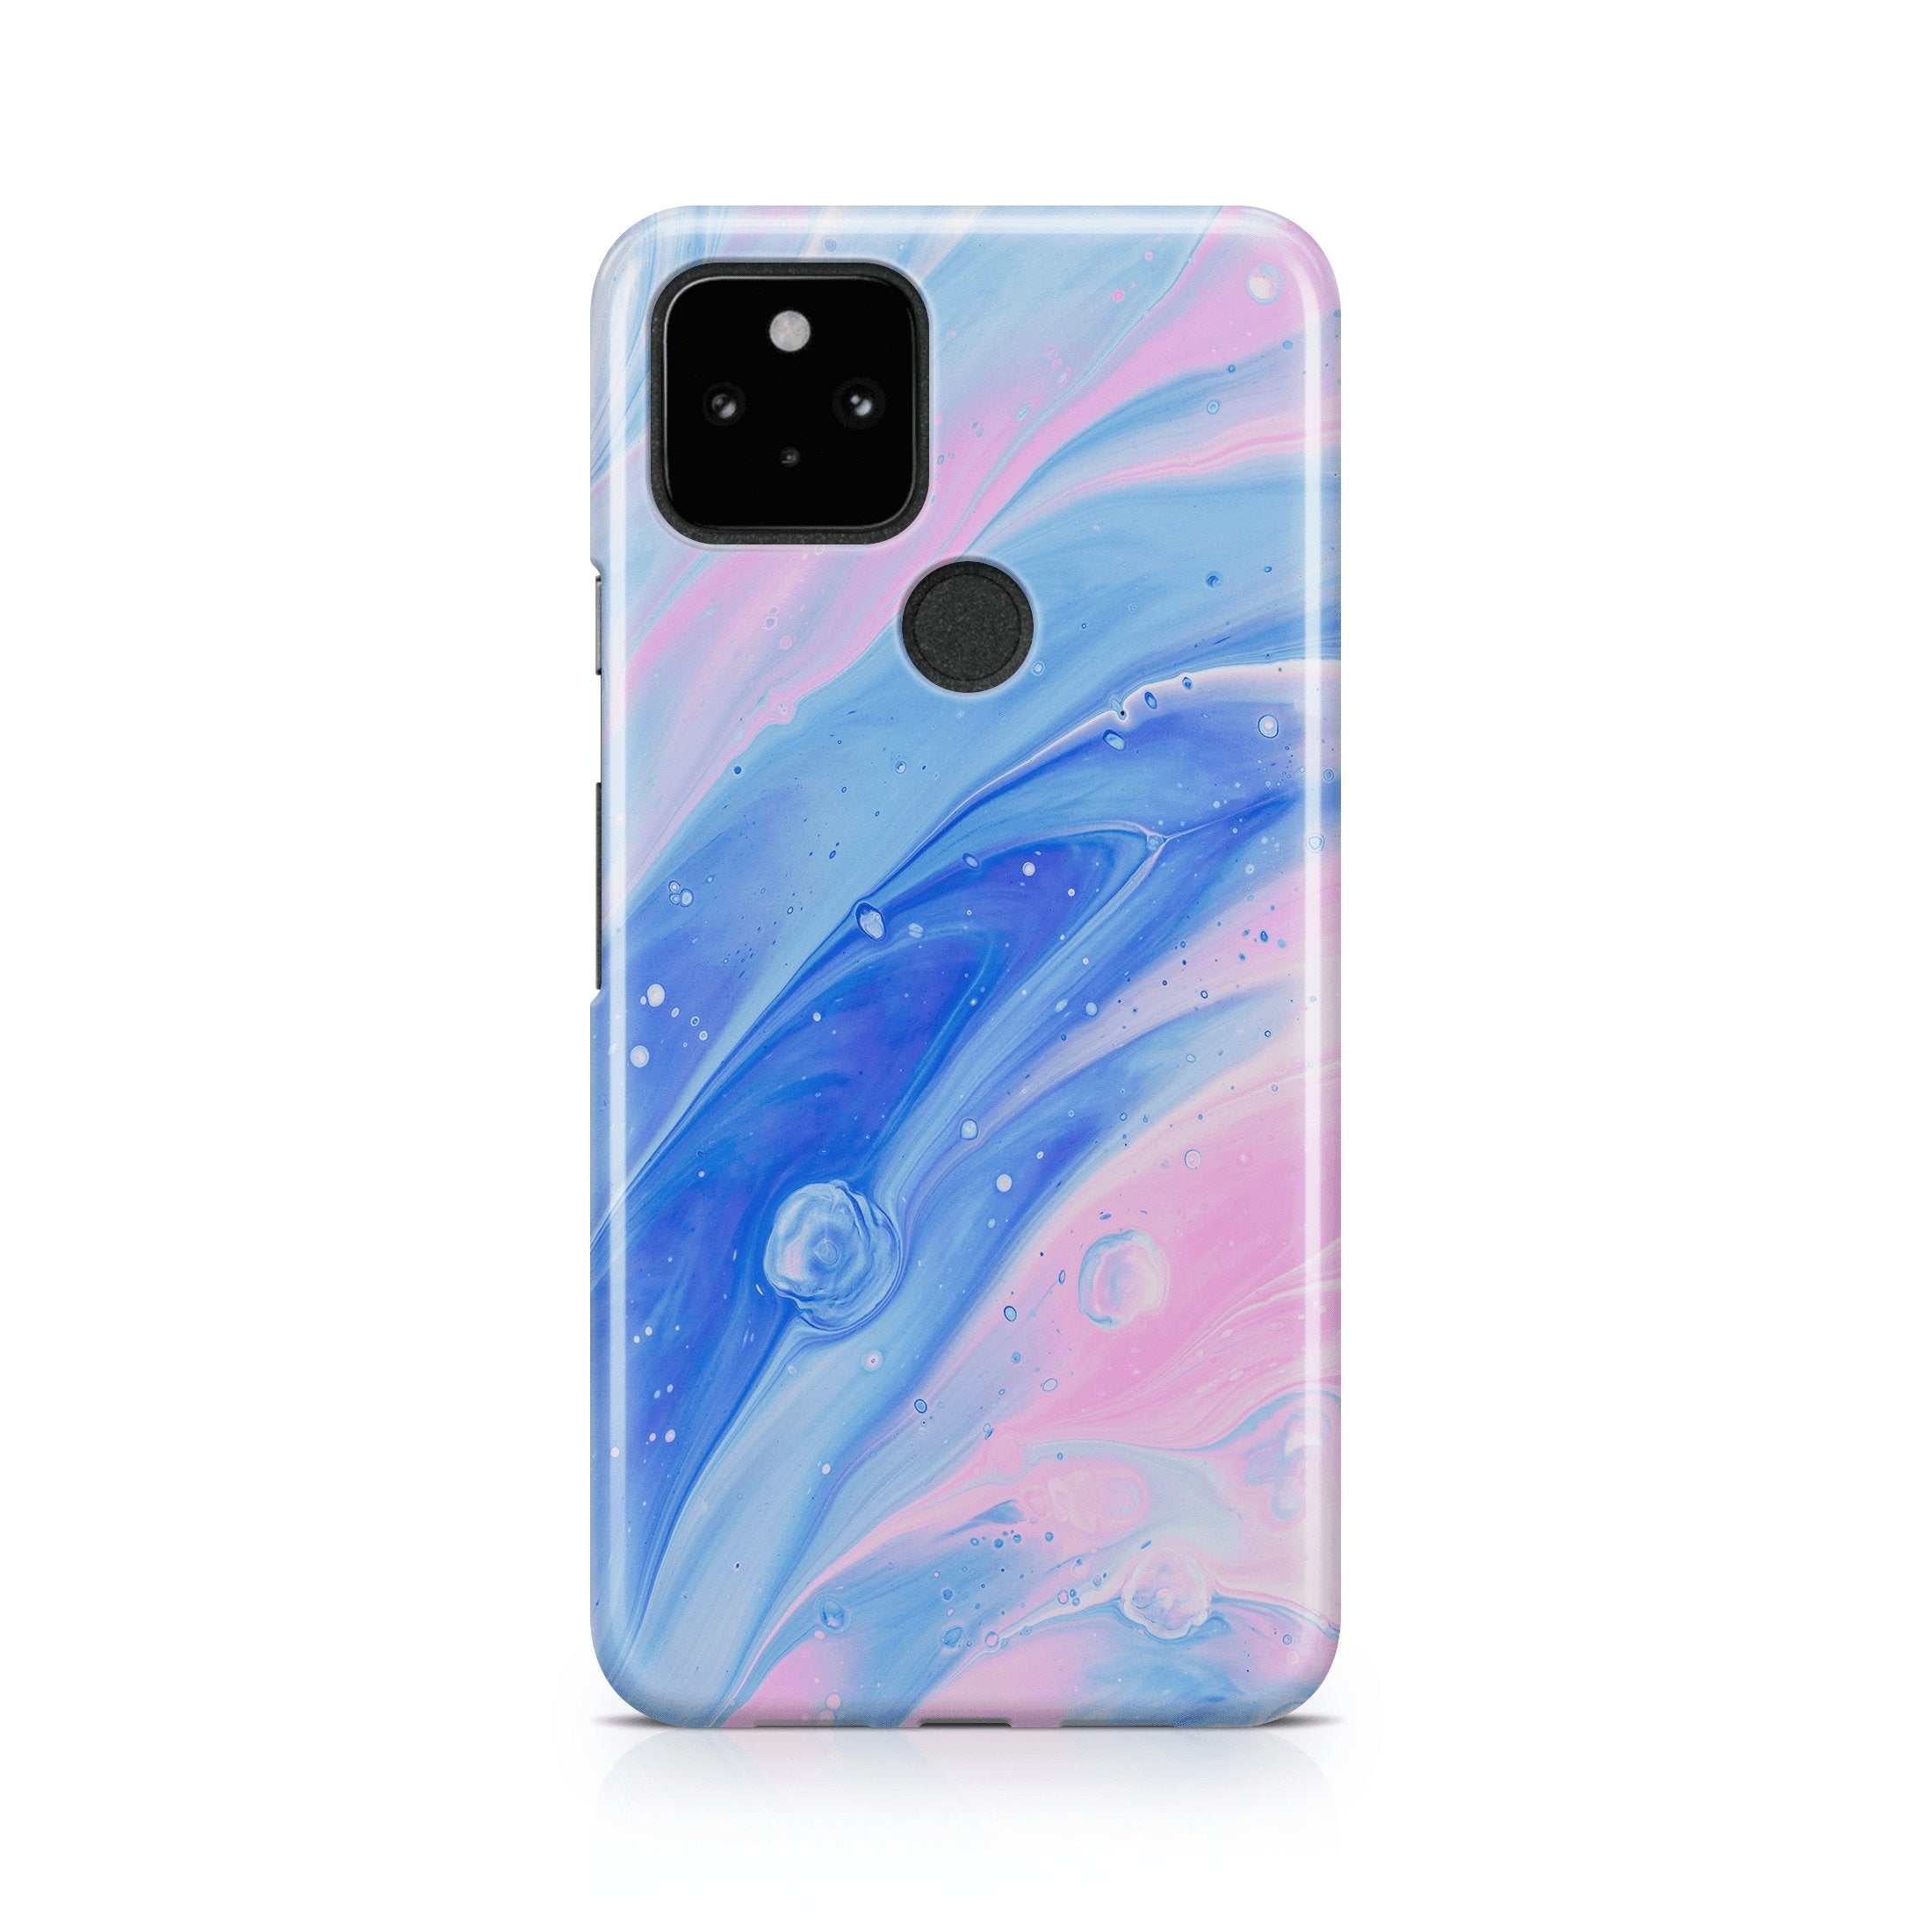 Calming Oil Paint - Google phone case designs by CaseSwagger